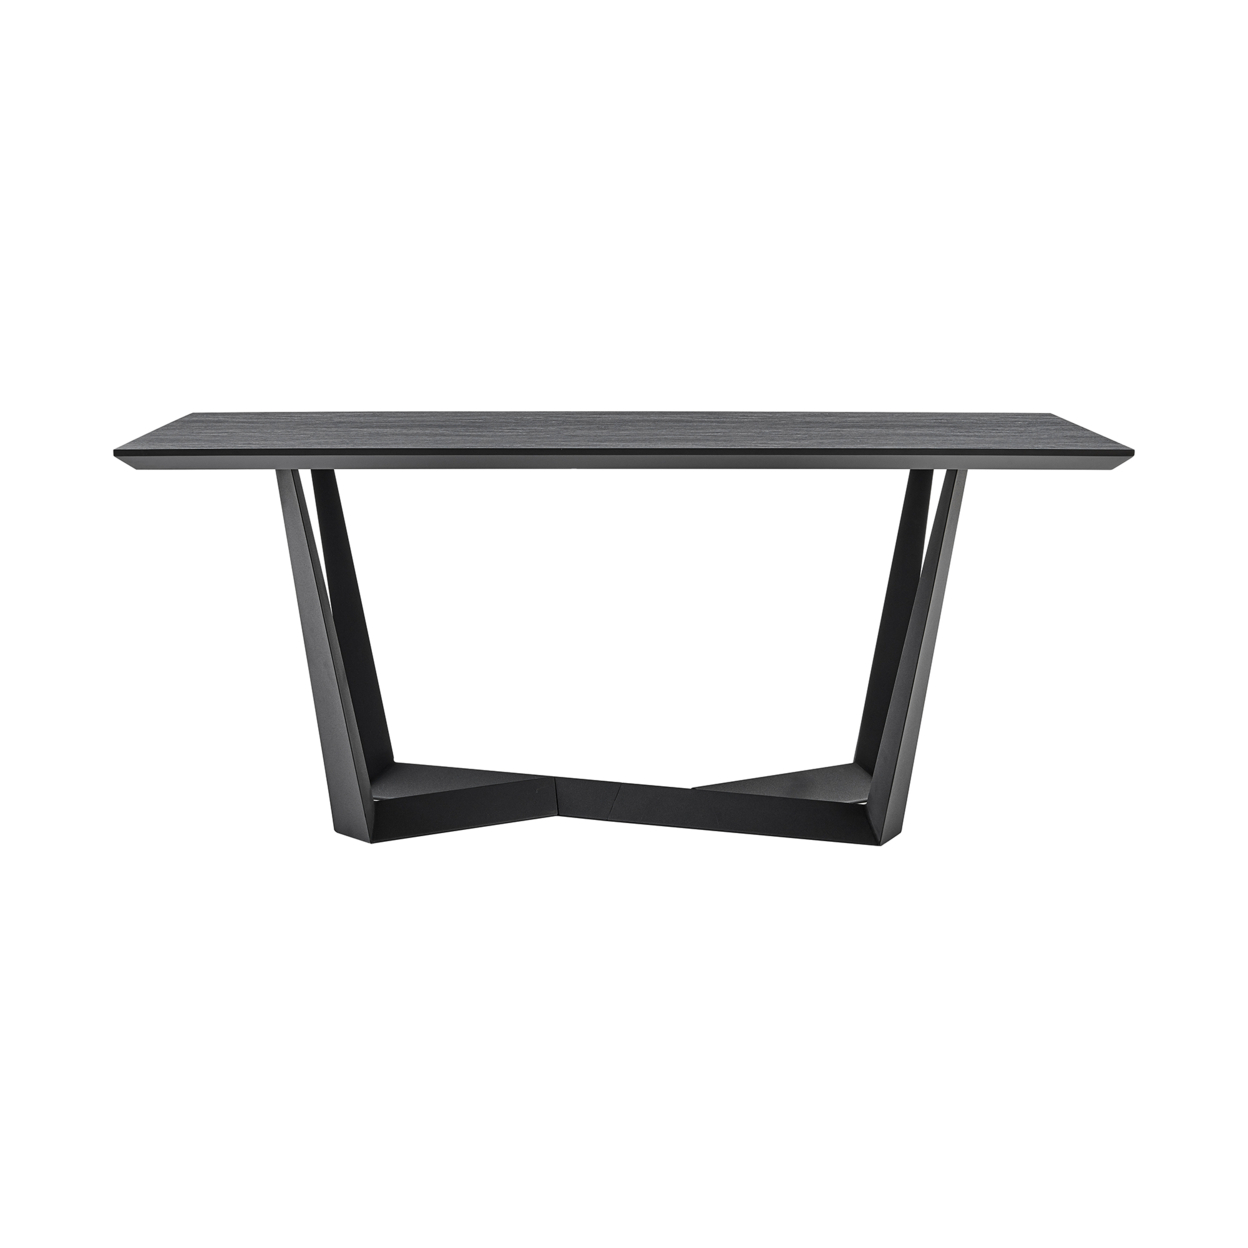 Dining Table With Melamine Top And Intersected Base, Gray And Black- Saltoro Sherpi